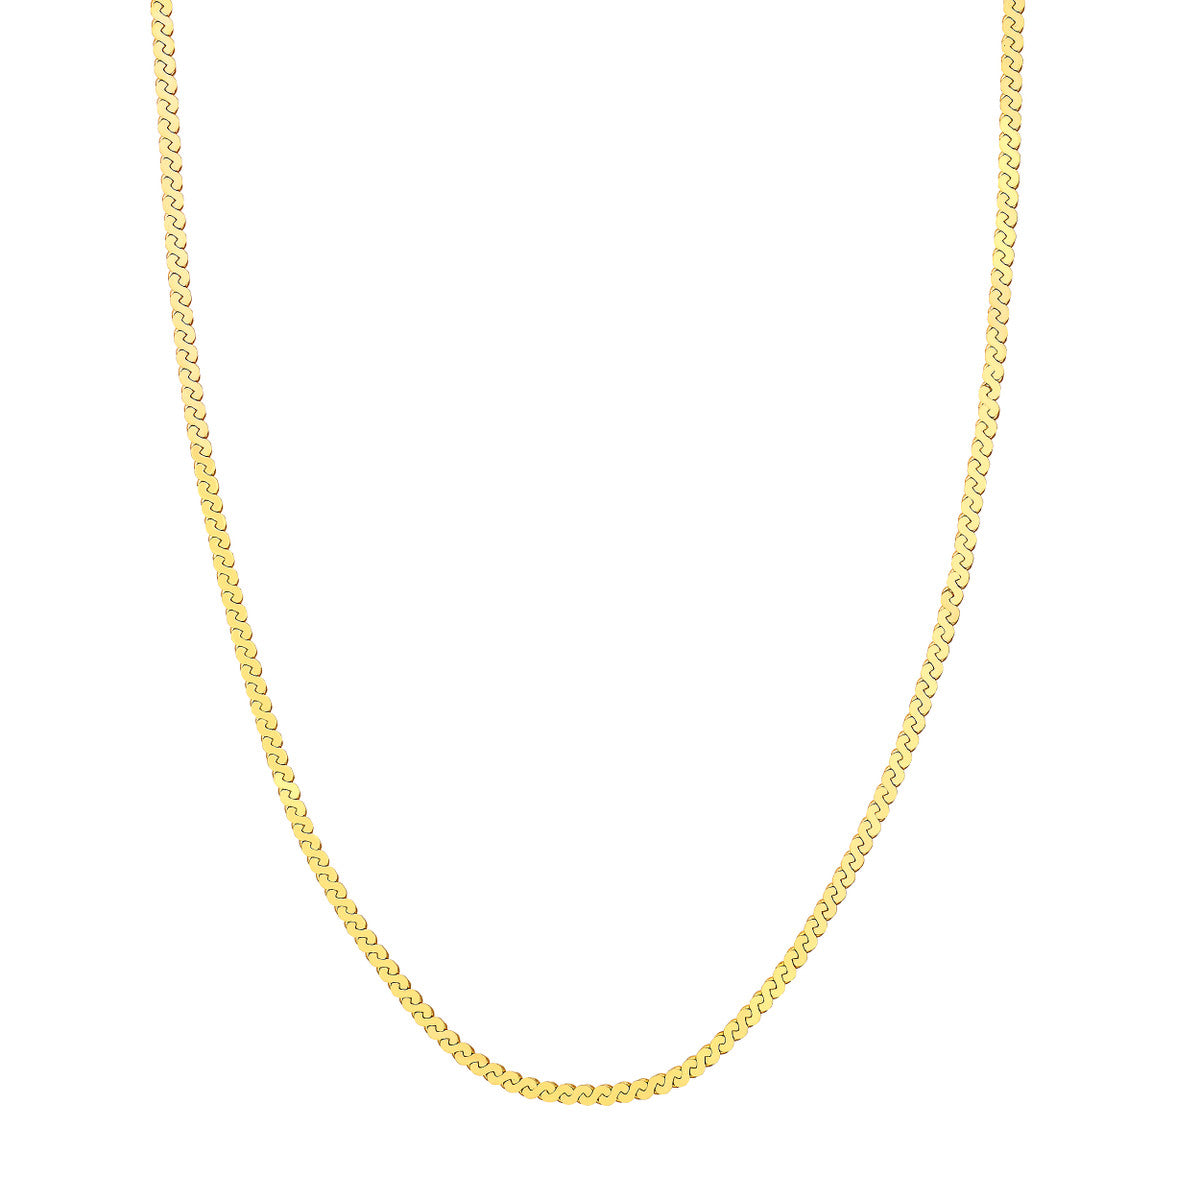 14K Gold 3mm Serpentine Chain Necklace with Lobster Lock